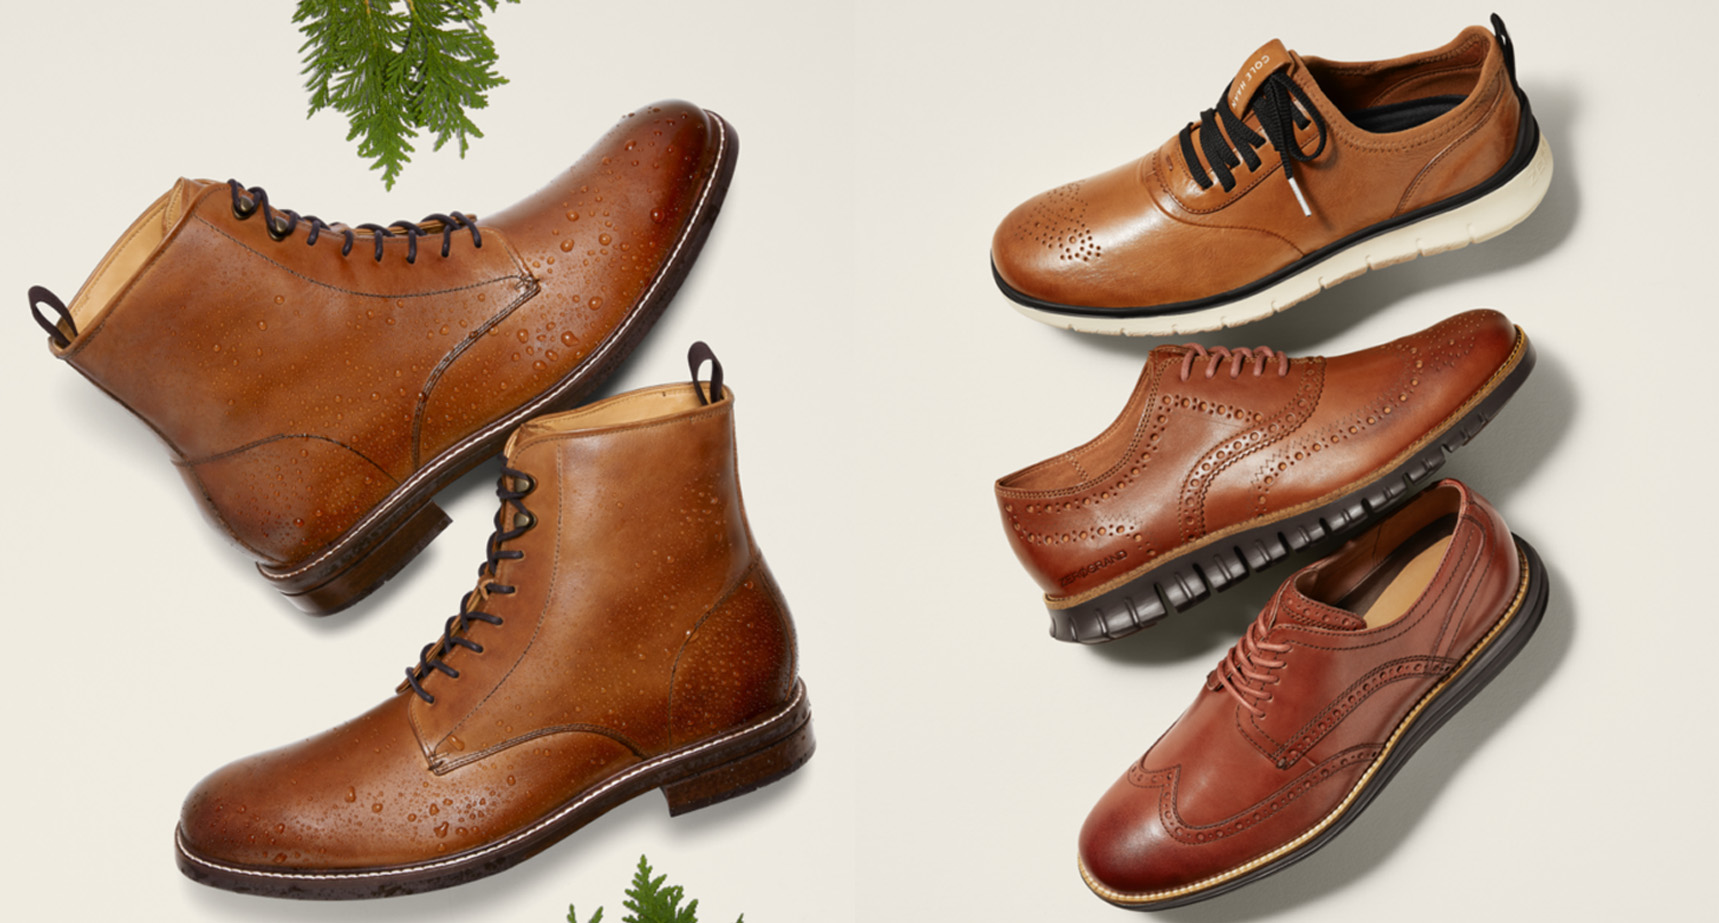 Cole Haan's Cyber Deals continue with up to 50 off sitewide + extra 10